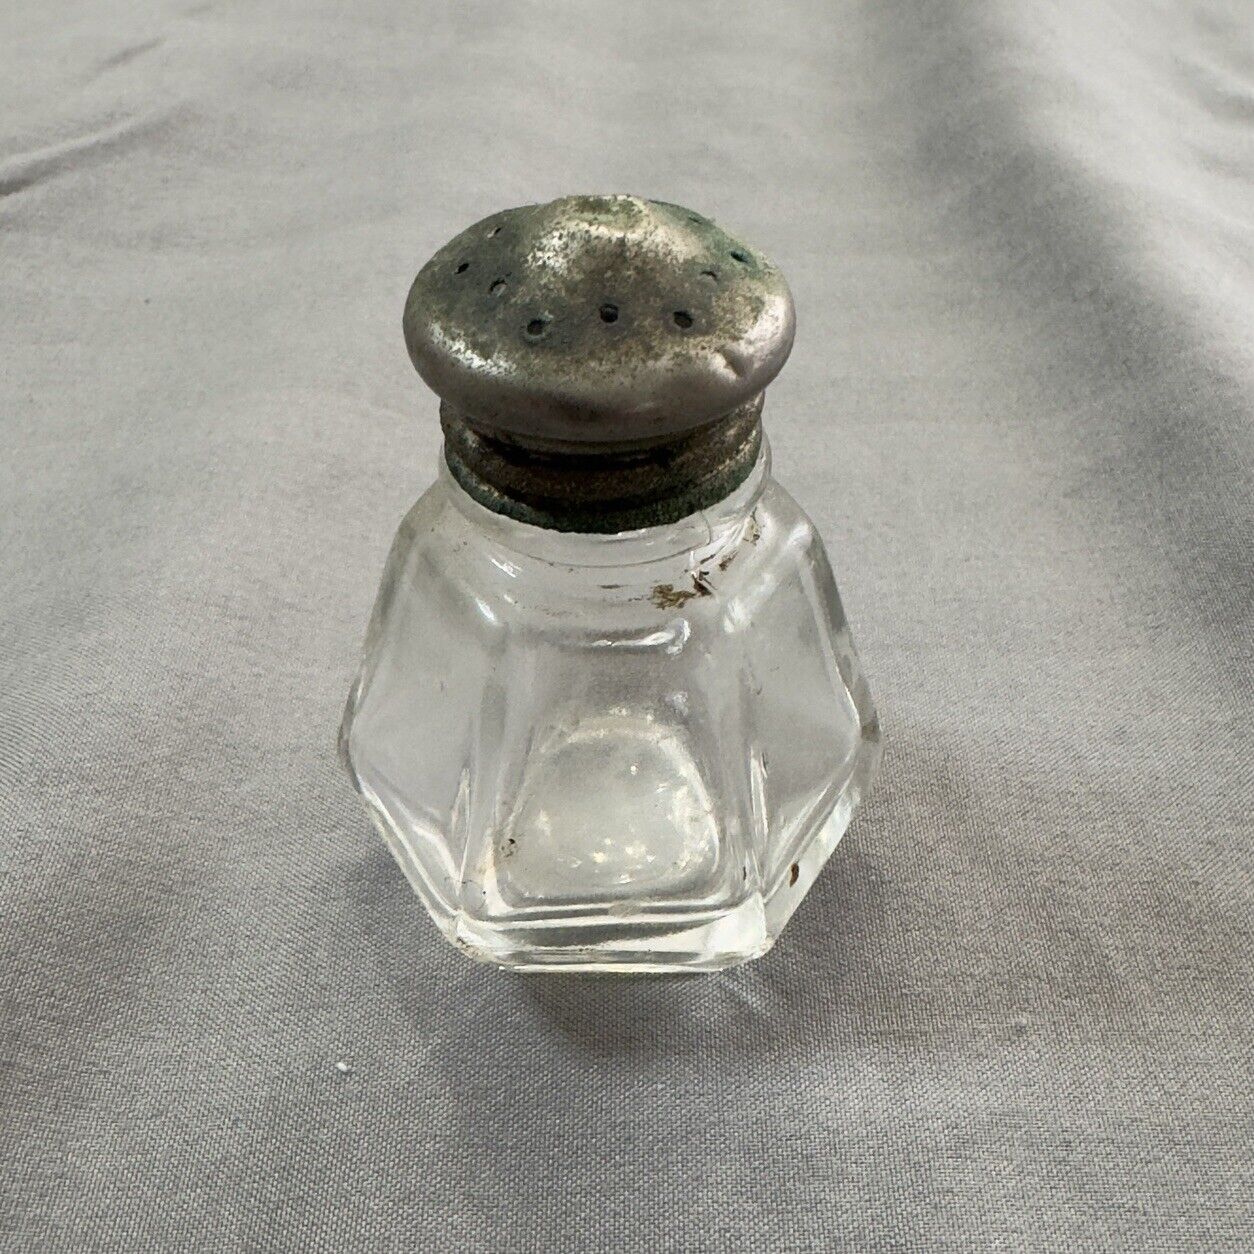 Mid-20th Century Six Sided Clear Glass Salt or Pepper Shaker - 2.5\